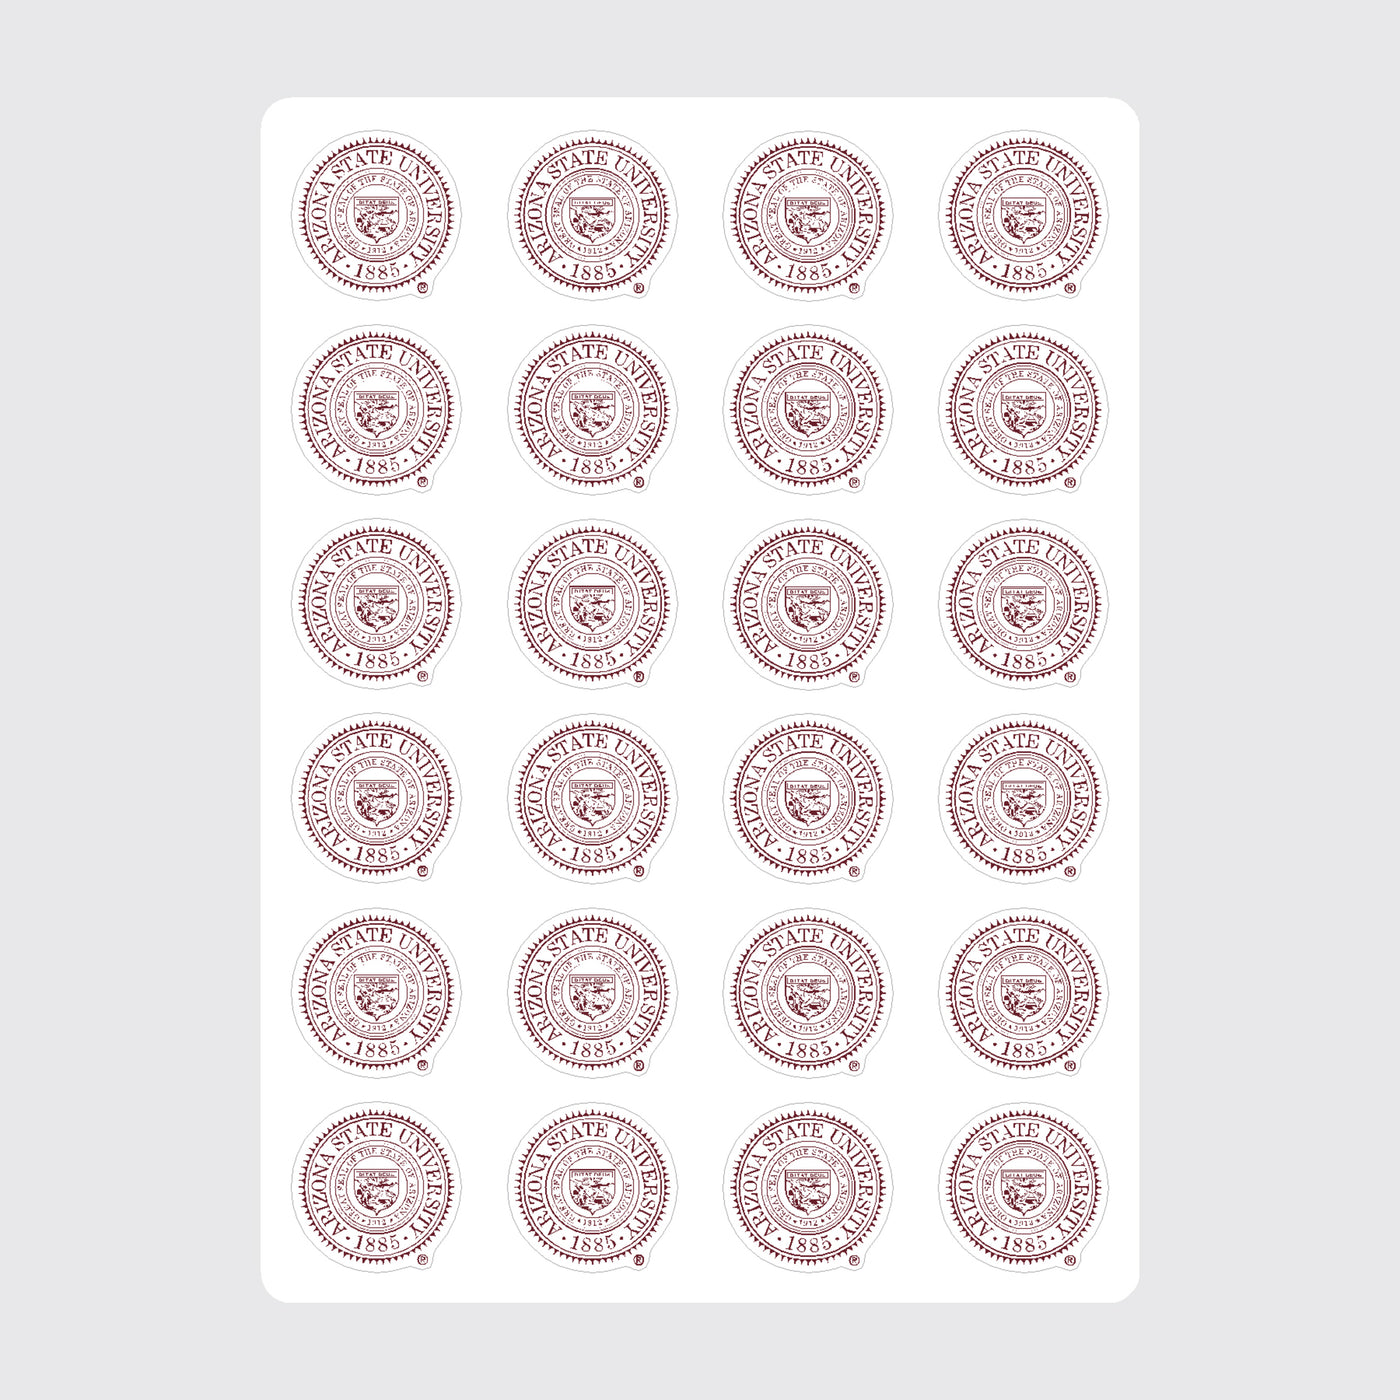 Shows a sheet with 24 ASU Seal stickers.